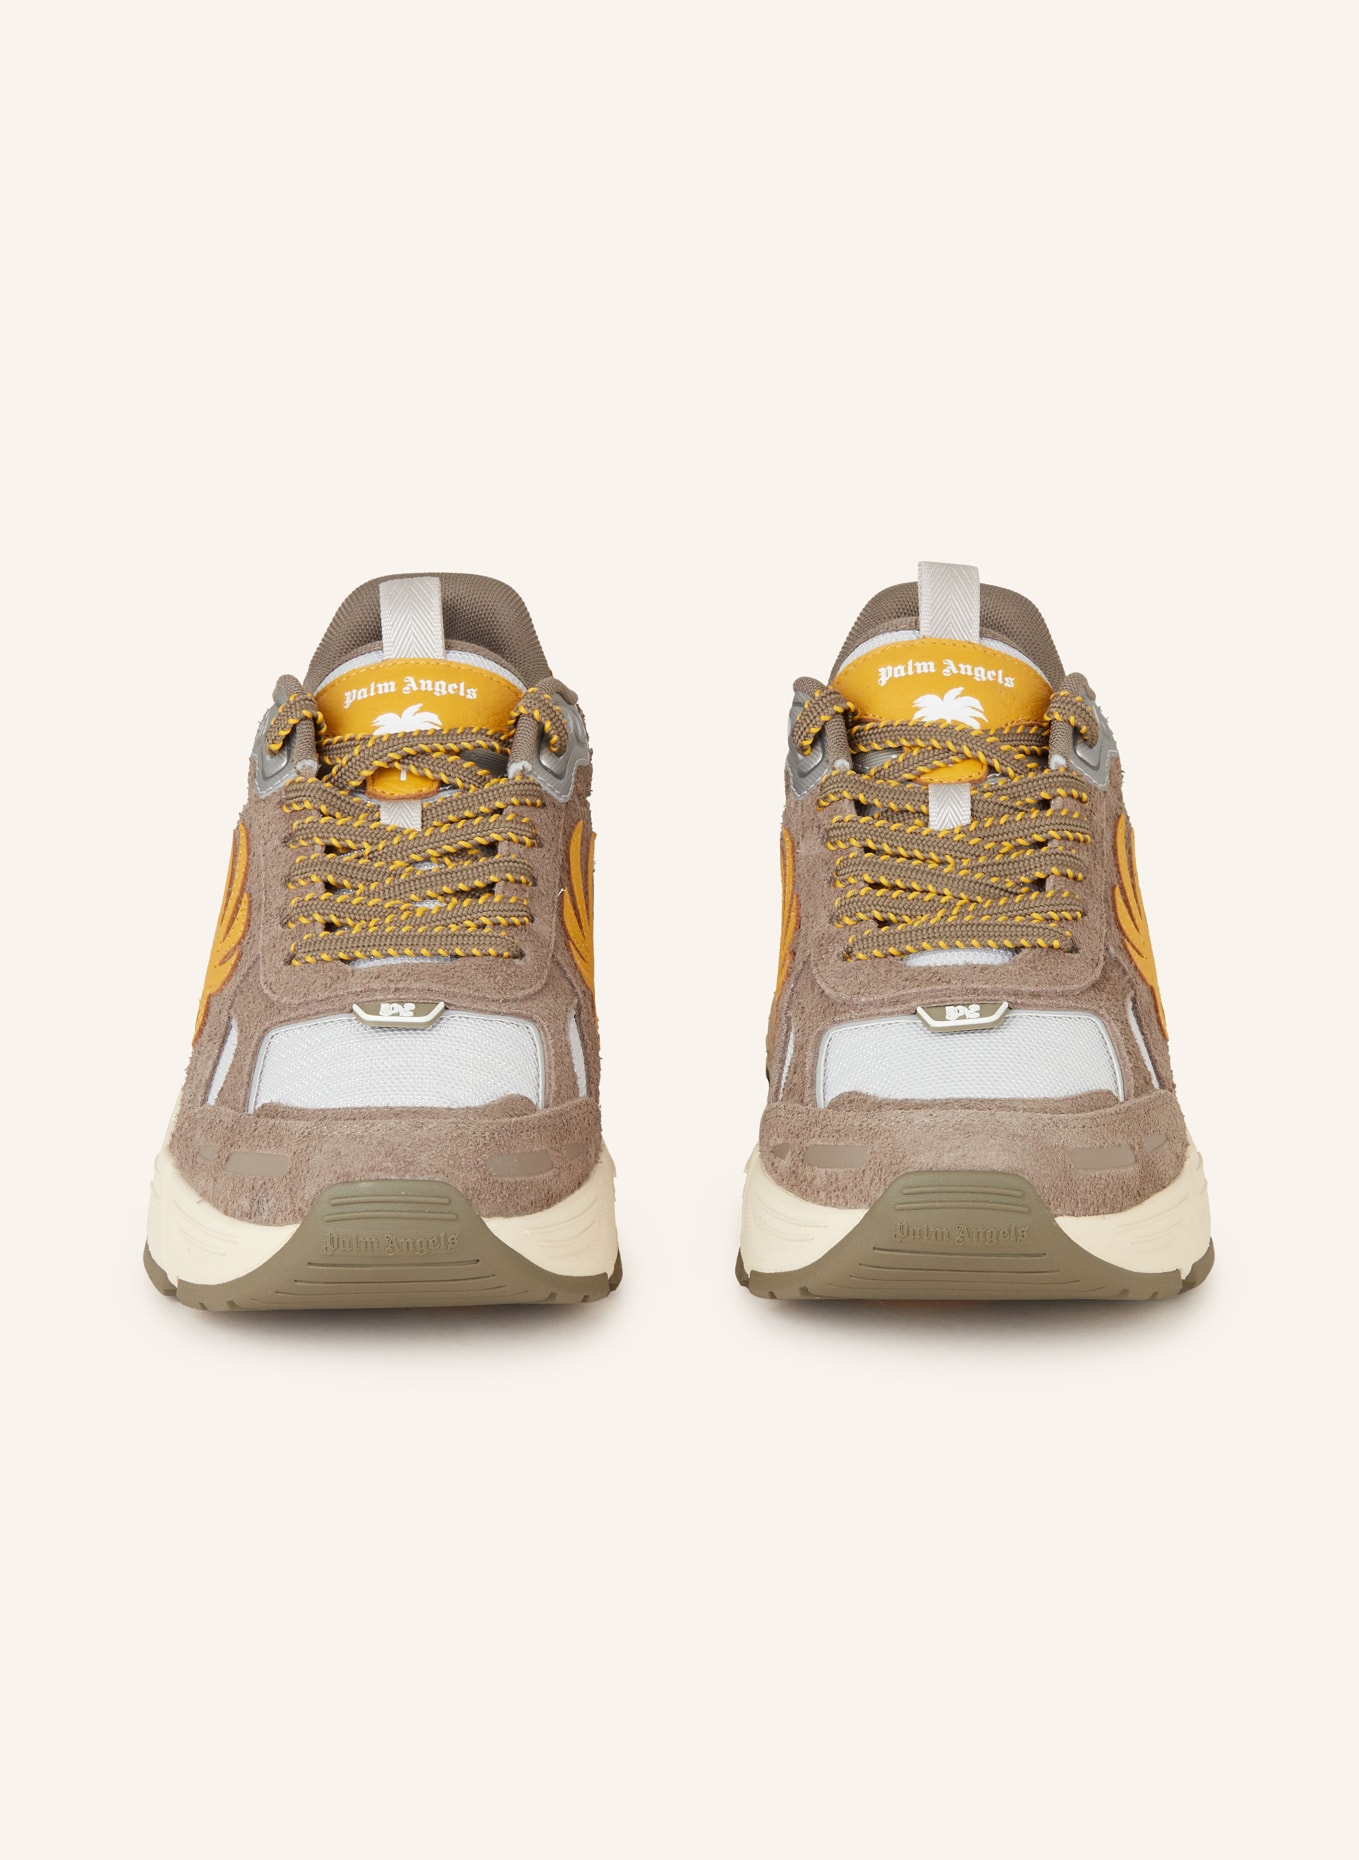 Palm Angels Sneakers PALM, Color: BROWN/ DARK YELLOW/ LIGHT GRAY (Image 3)